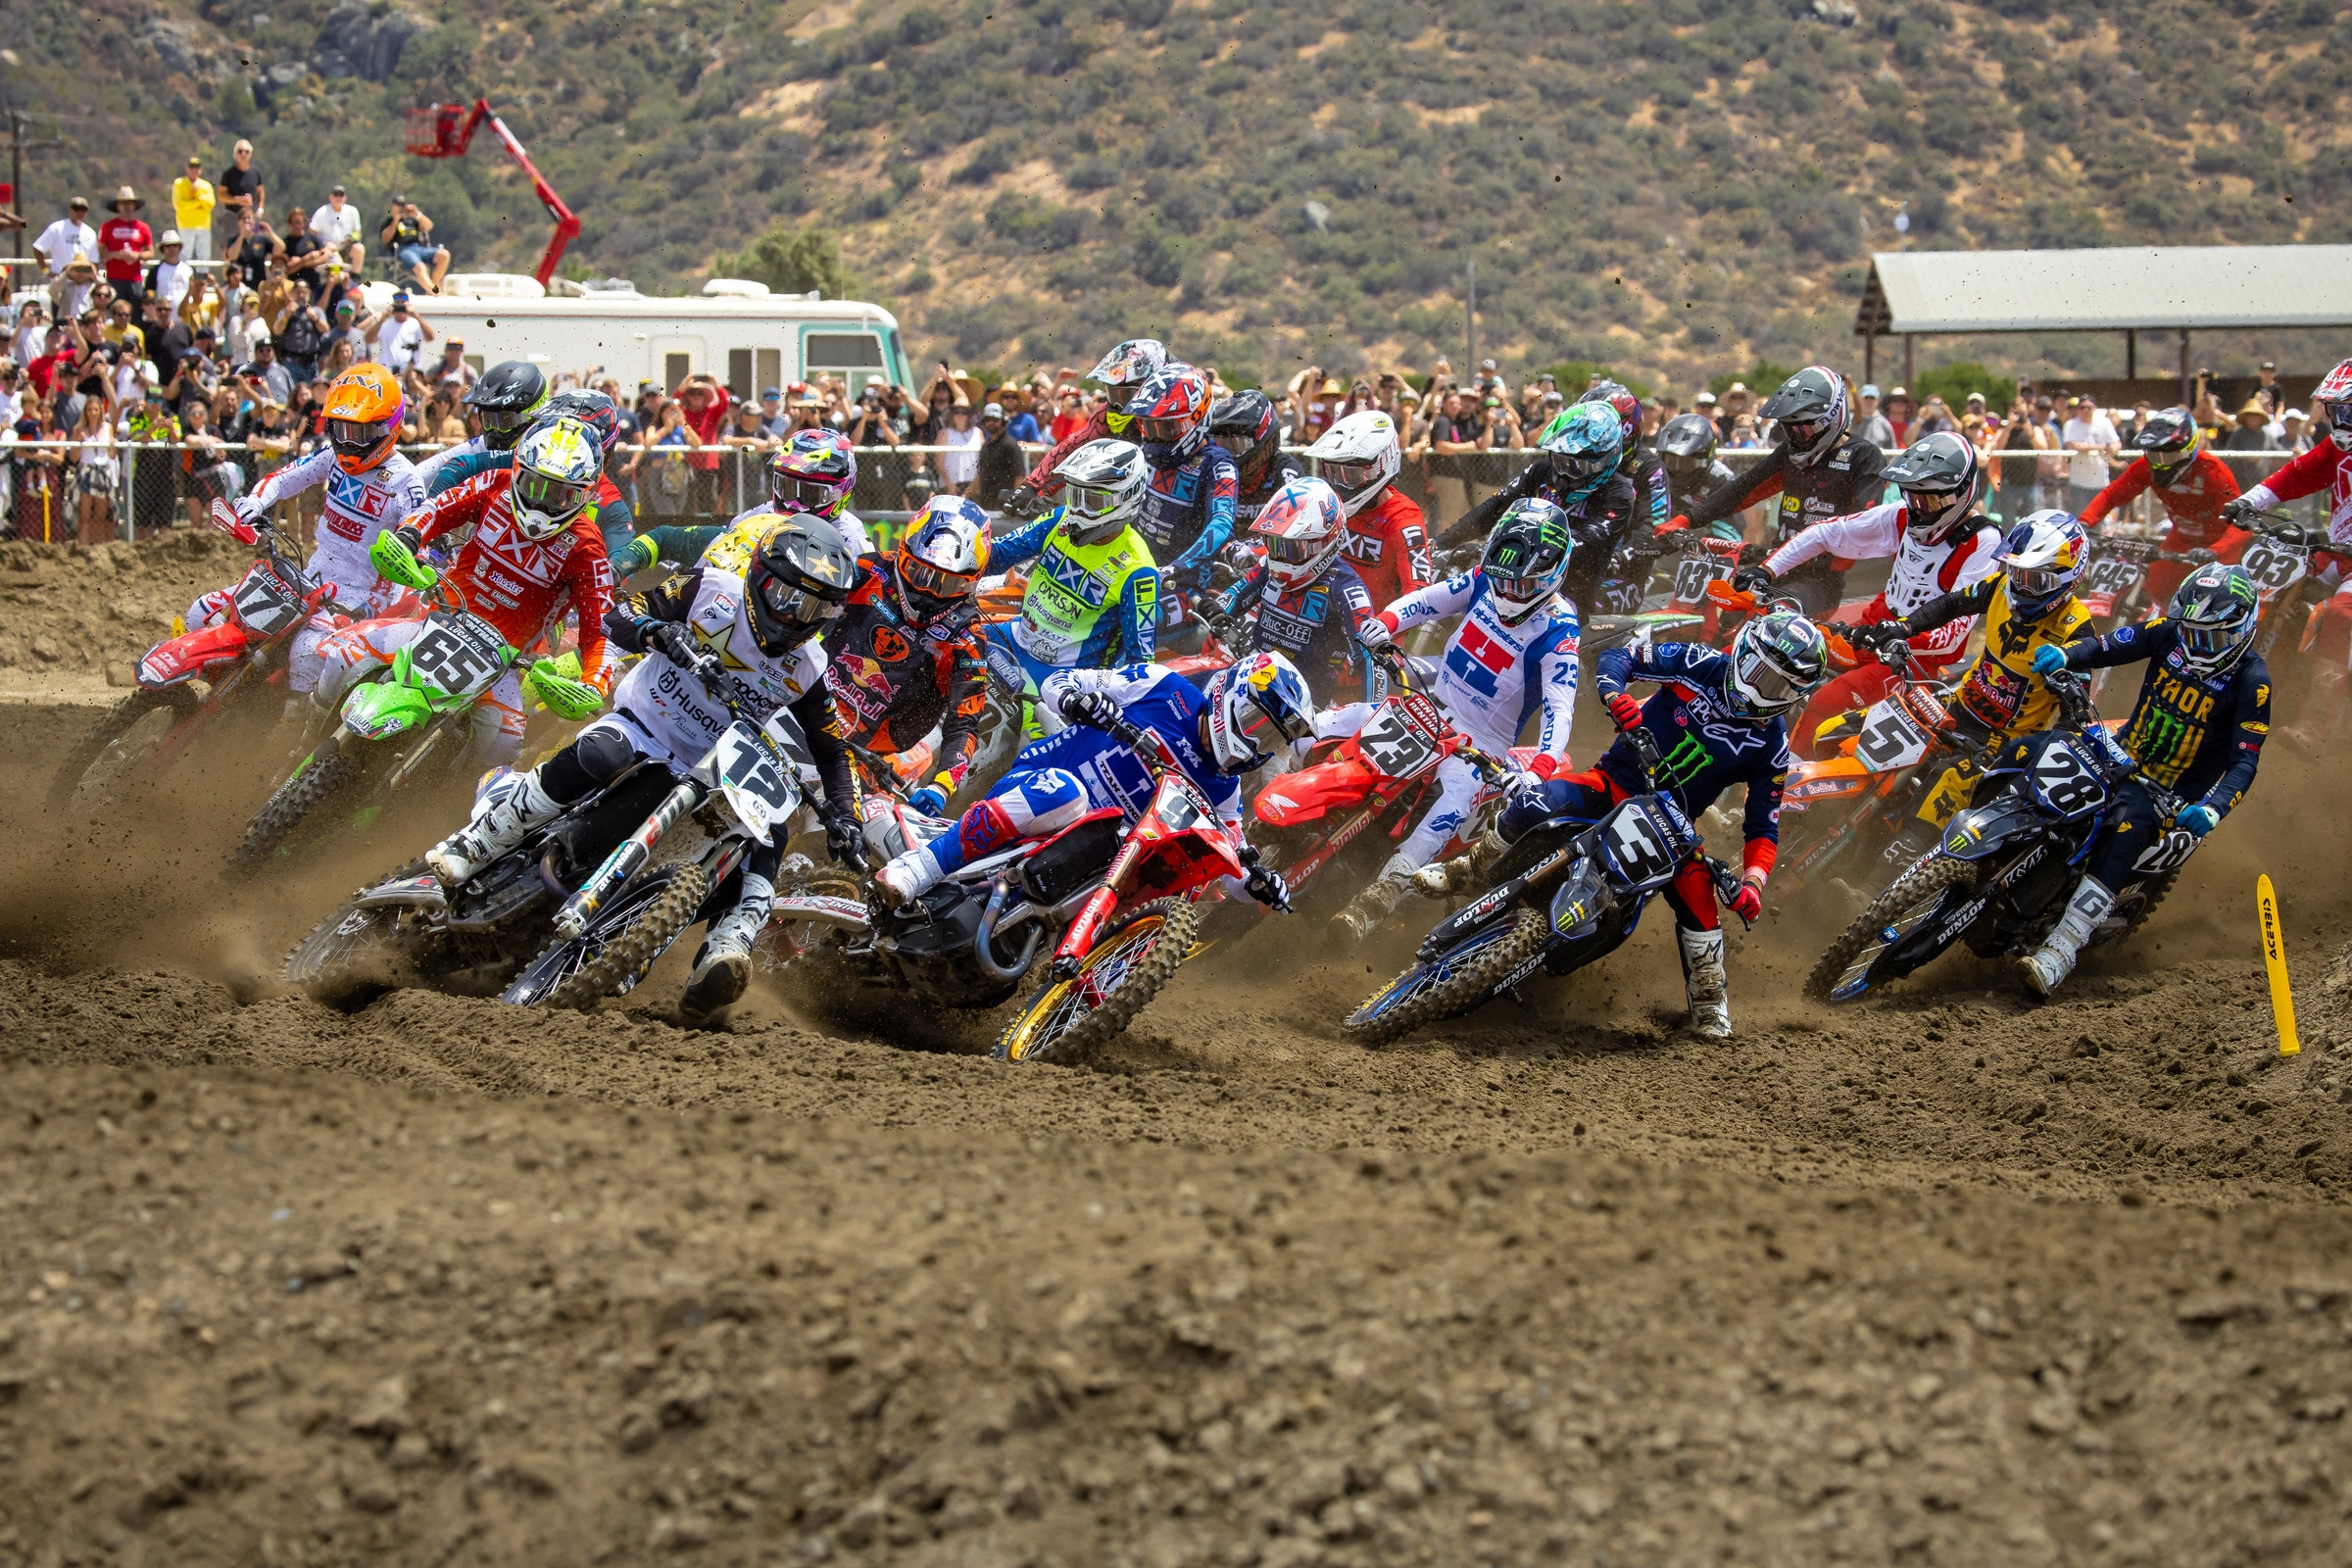 Race Report from the 2022 Fox Raceway 1 National